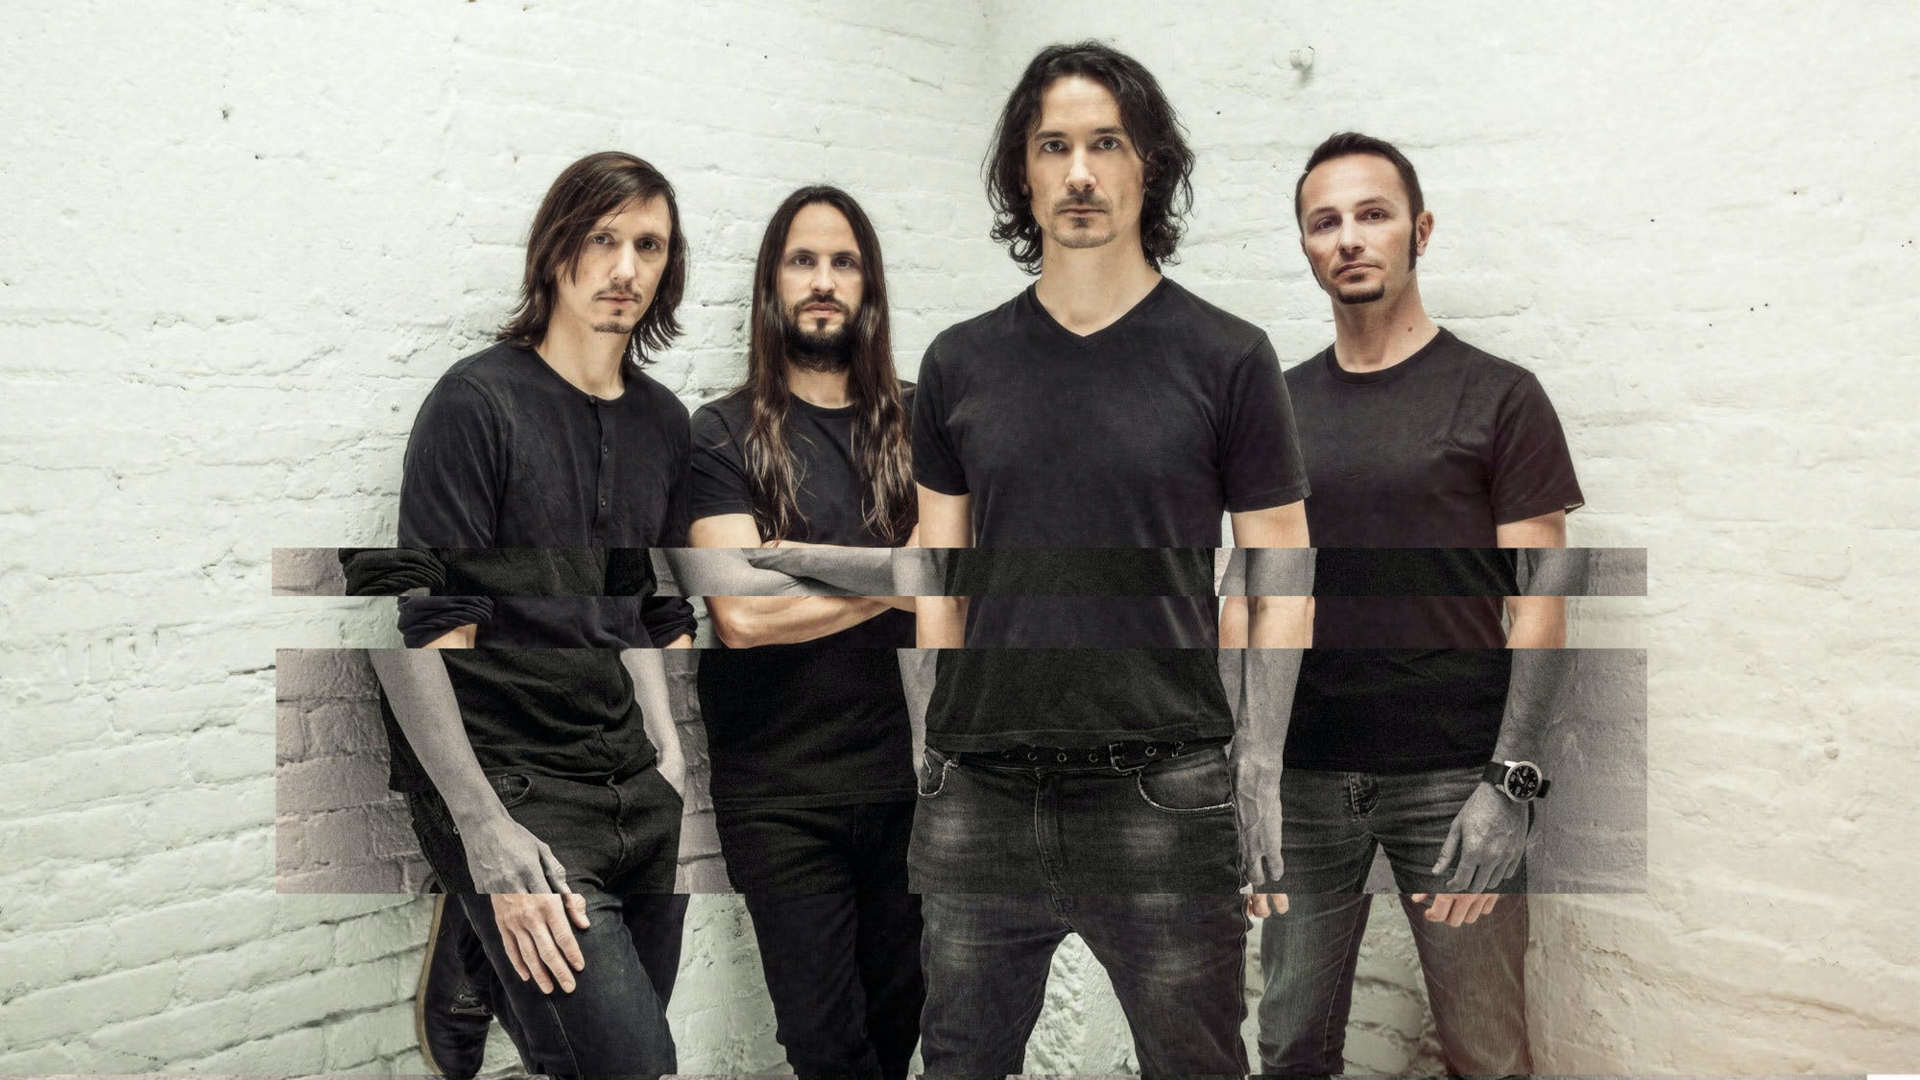 HD wallpaper featuring a band of four members standing against a white brick wall background, tagged with Gojira.